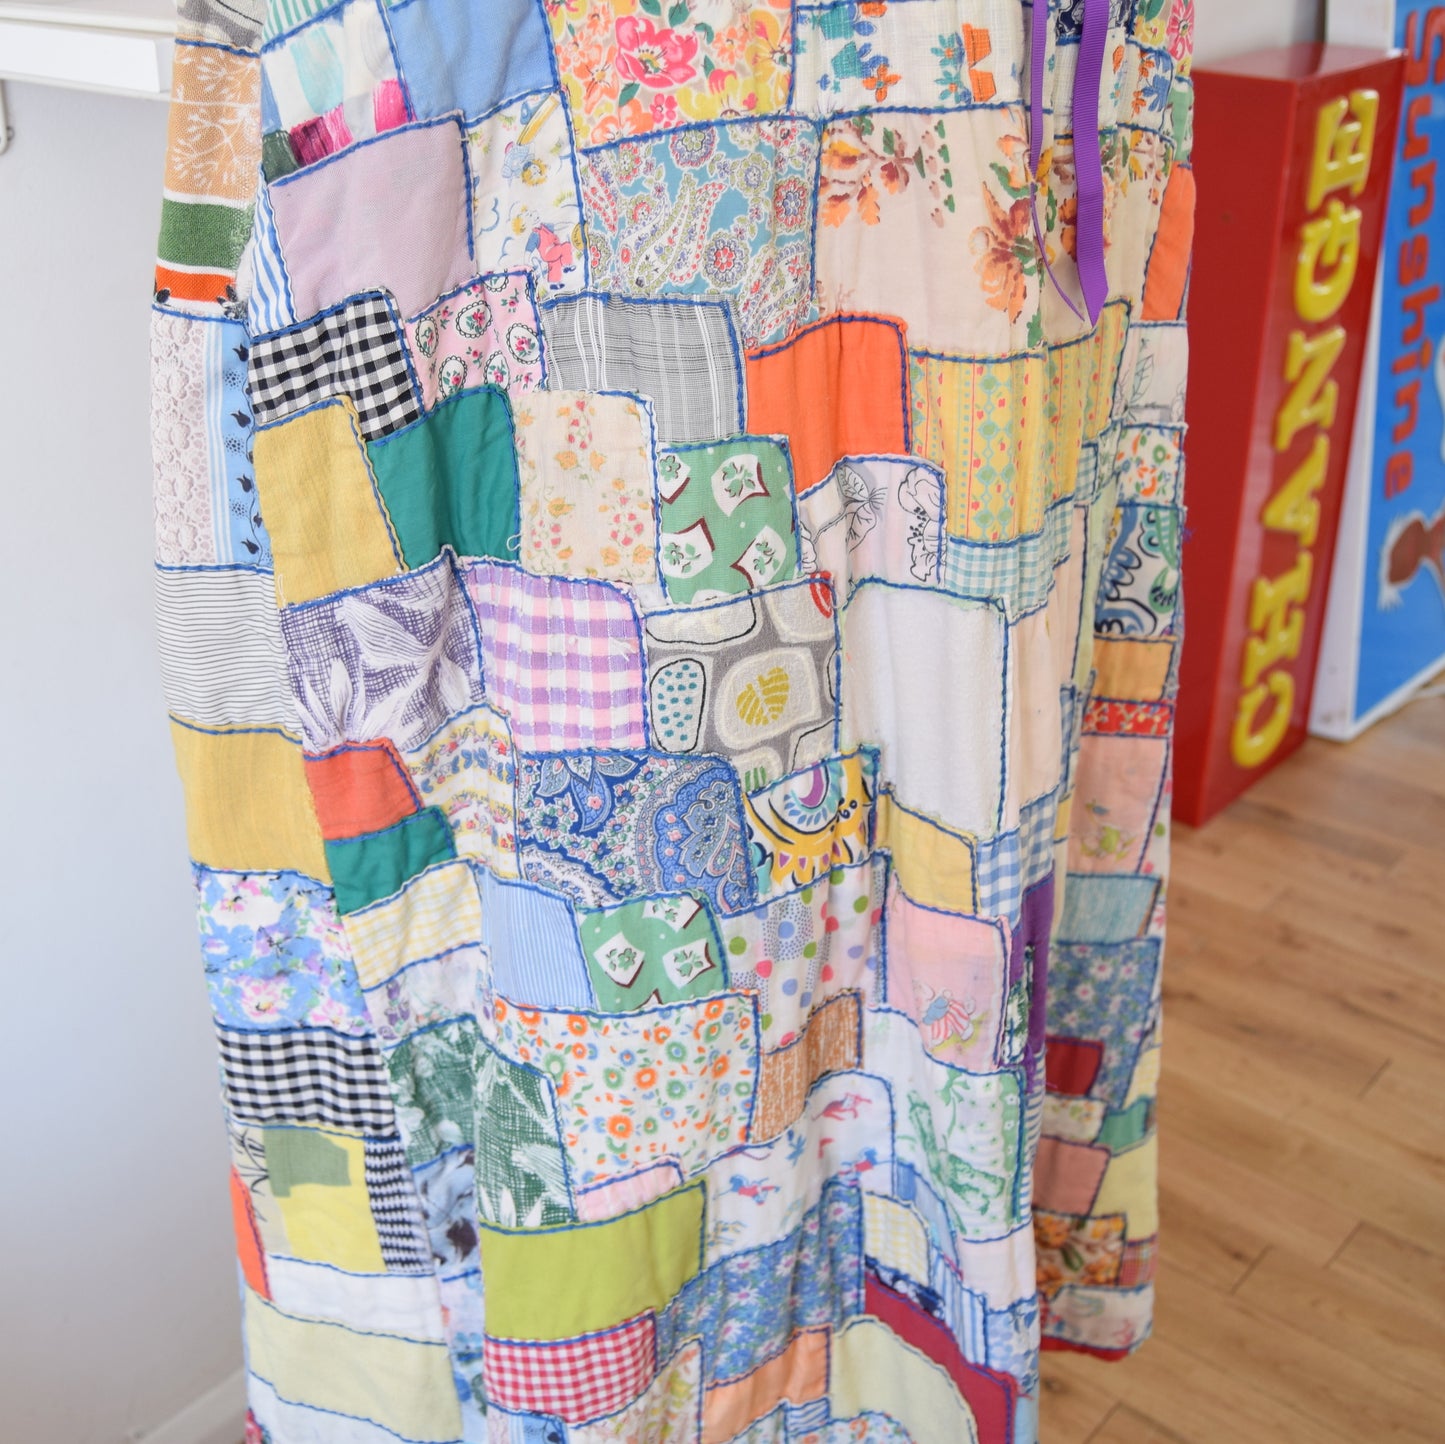 Vintage 1950s Fabric Patchwork Hooded Cape - Amazing!